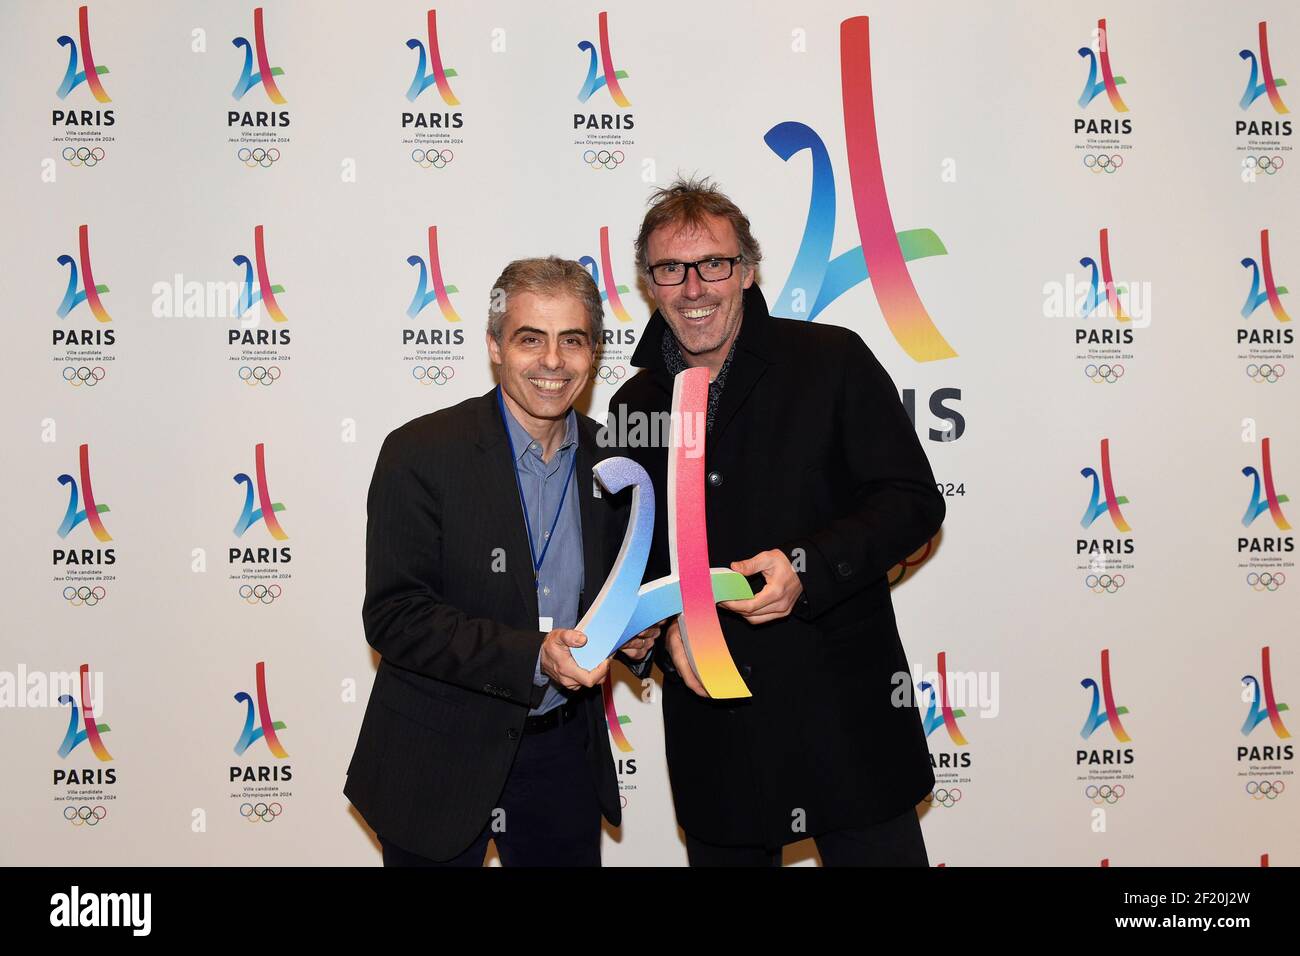 Jean Philippe Gatien and Laurent Blanc attend the Paris 2024 file  Presentation in the Paris Philharmony in Paris on February 17, 2016 - The  race to host the 2024 Olympic Games gets